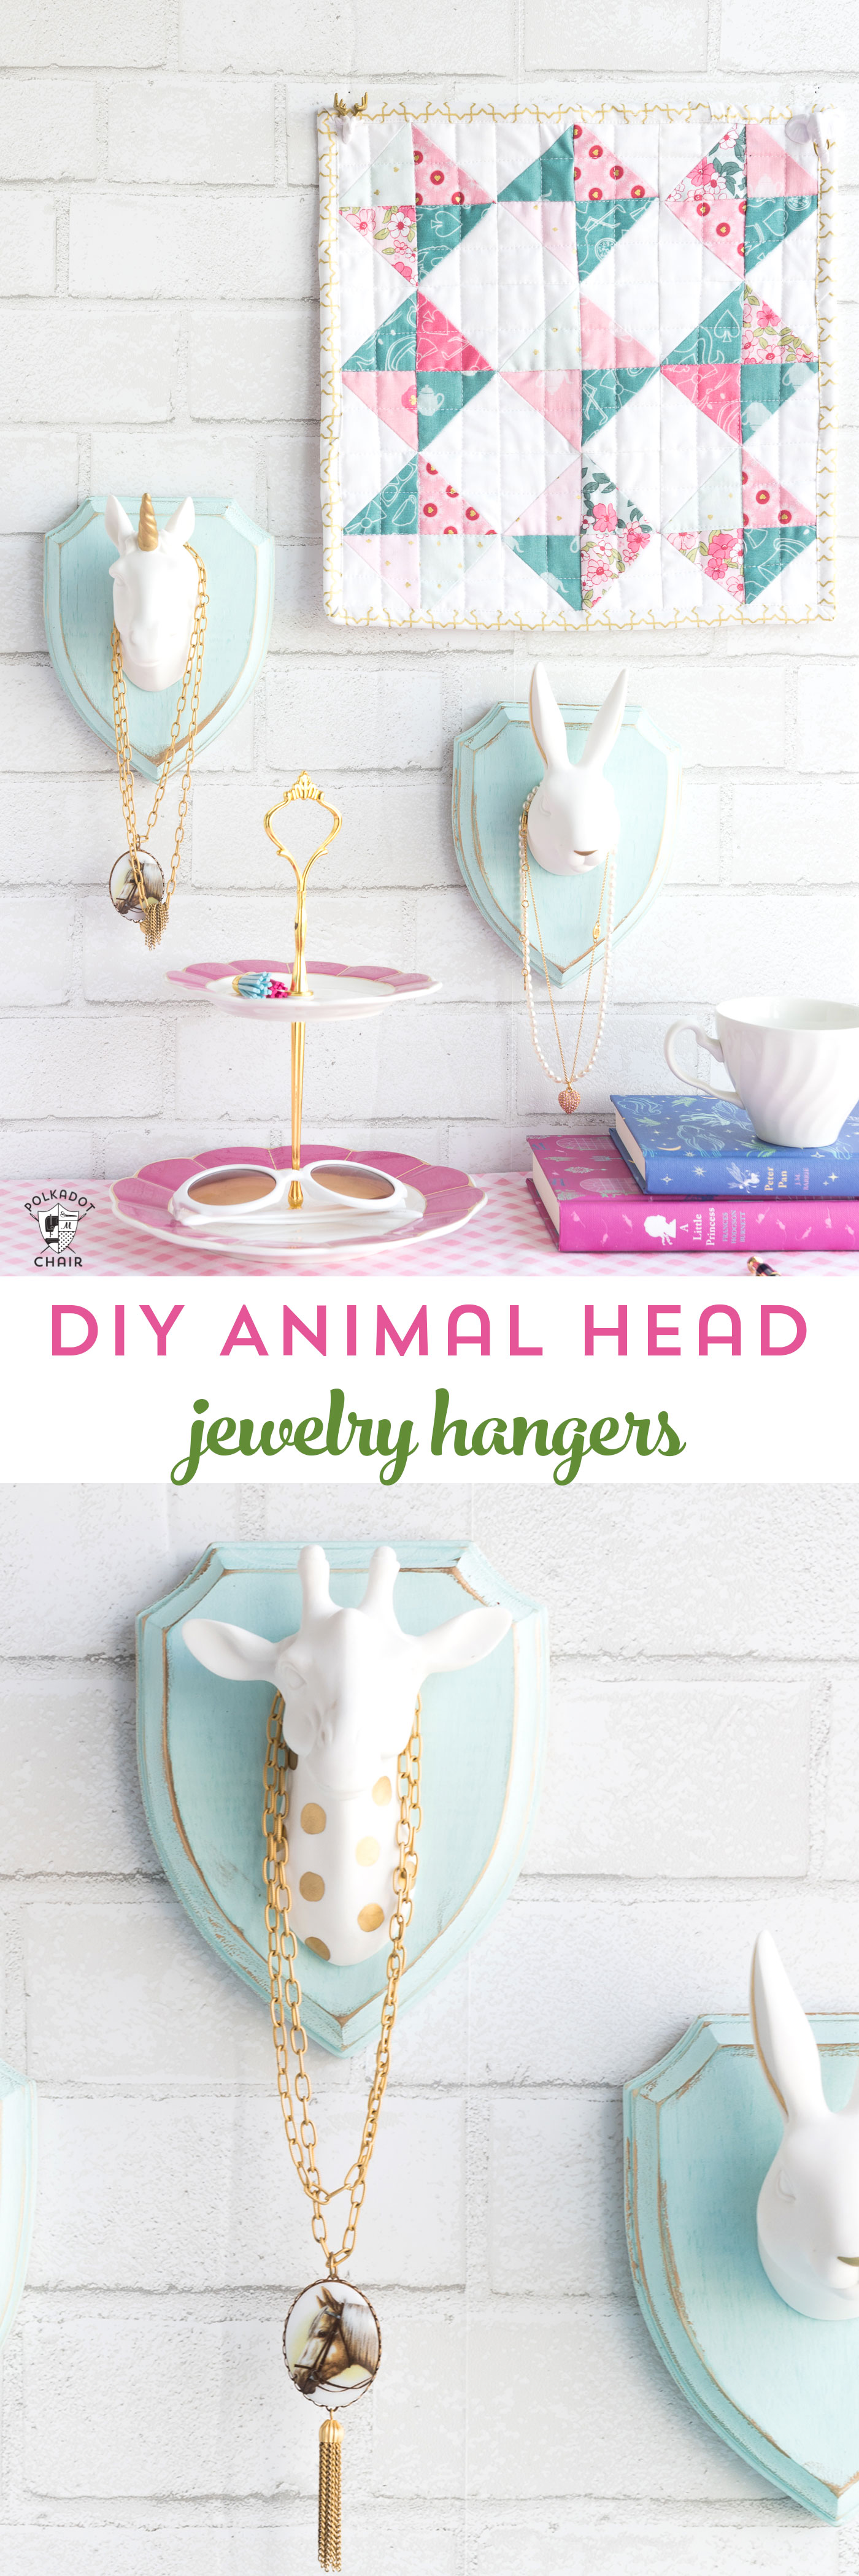 Cute and Whimsical DIY Jewelry Hangers made with wood plaques and animal heads; a creative way to display your jewelry